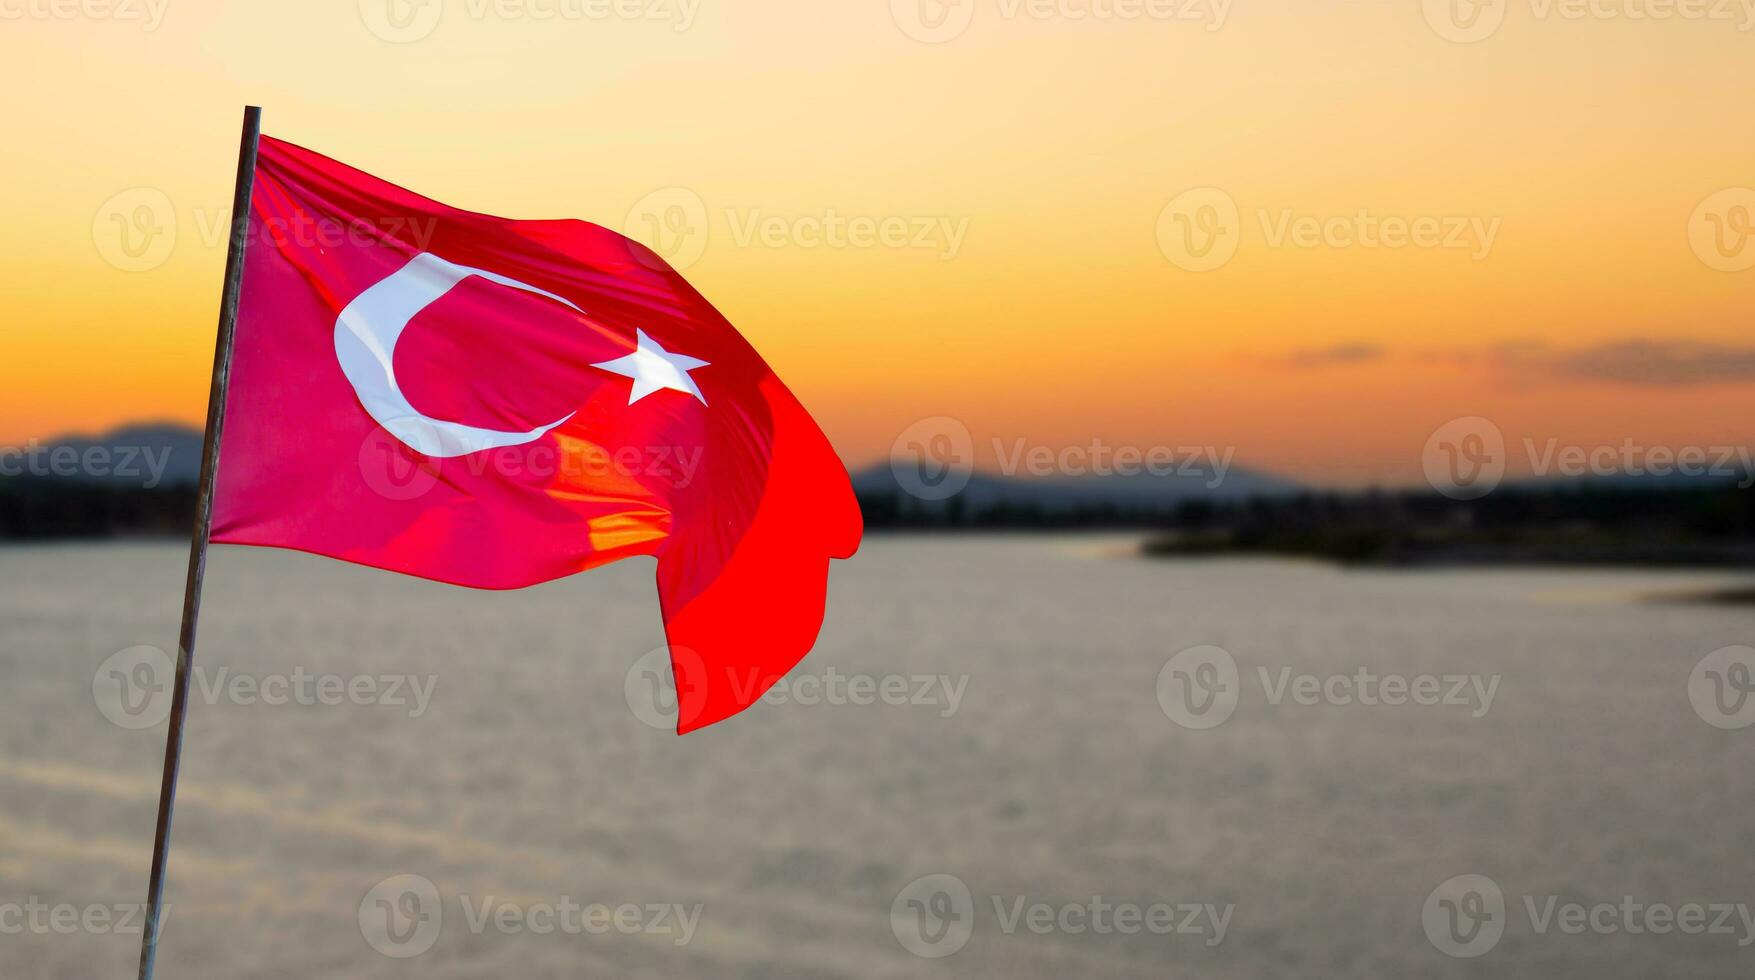 Turkish flag against lake view at the sunset. April 23, August 30, October 29 celebration photo. Copy space for text. Flag of Turkey. photo